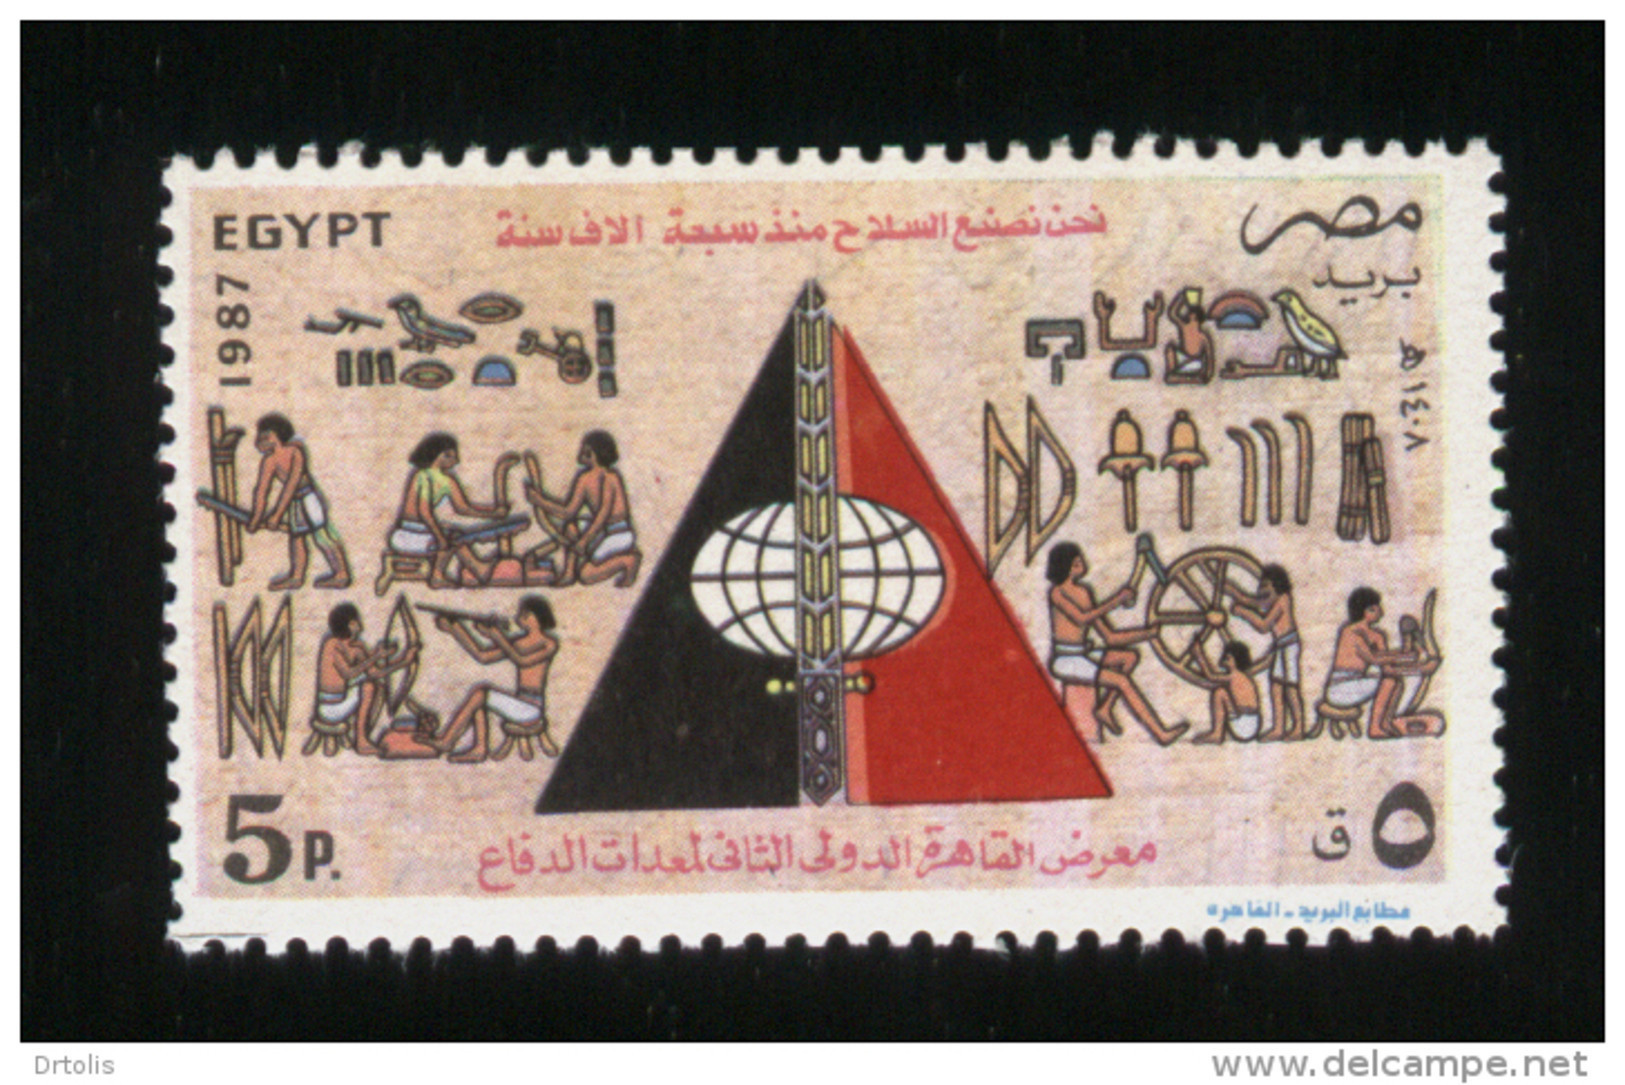 EGYPT / 1987 / INTL. DEFENCE EQUIPMENT EXHIBITION / ANCIENT EGYPTIANS MAKING WEAPONS / MNH / VF - Unused Stamps